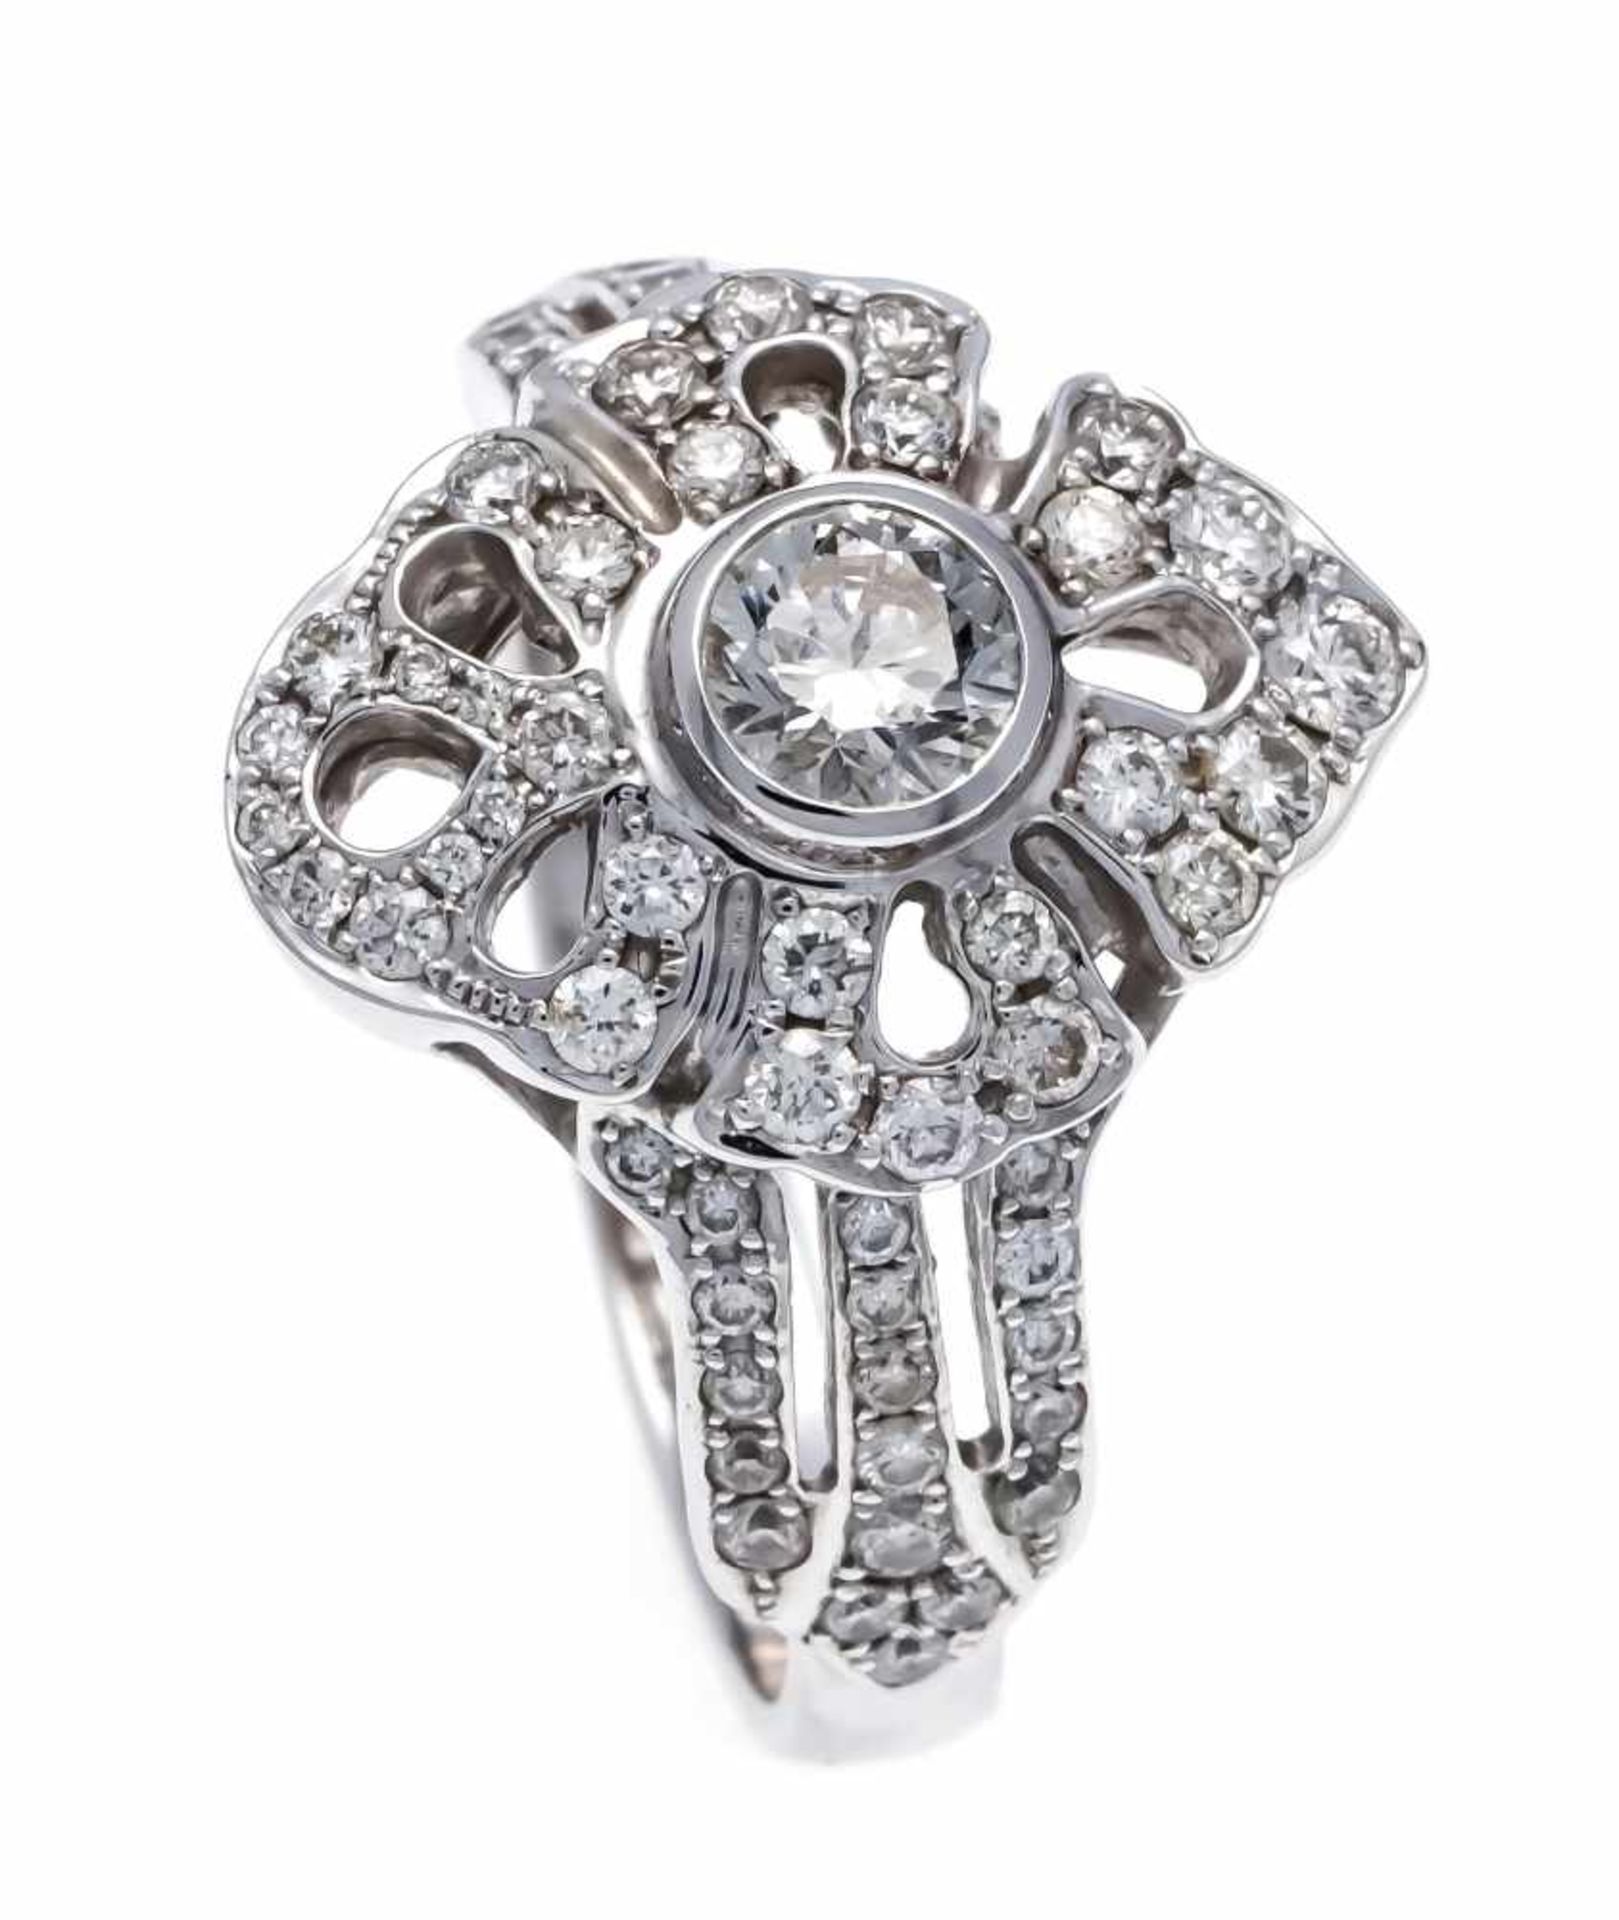 Brilliant ring WG 585/000 with a brilliant 0.36 ct and diamonds, total 0.34 ct, total 0.70